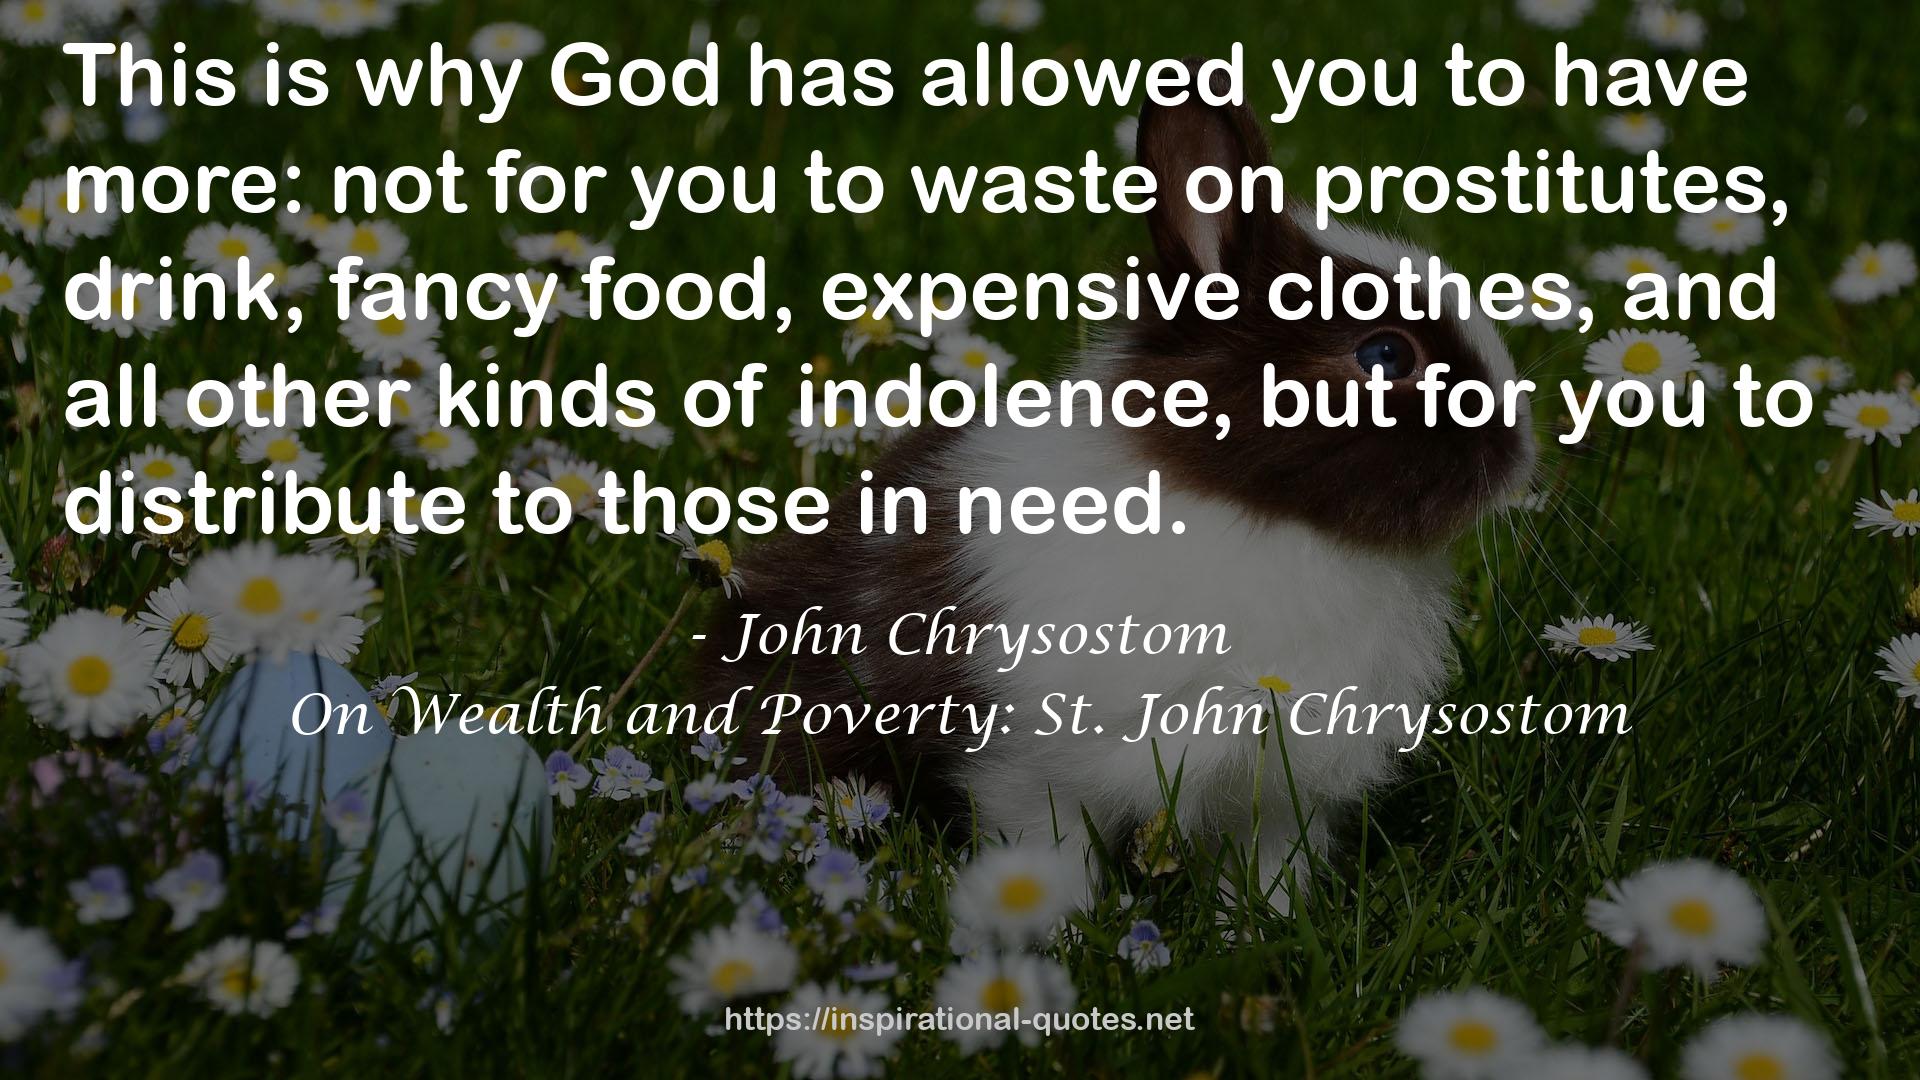 On Wealth and Poverty: St. John Chrysostom QUOTES